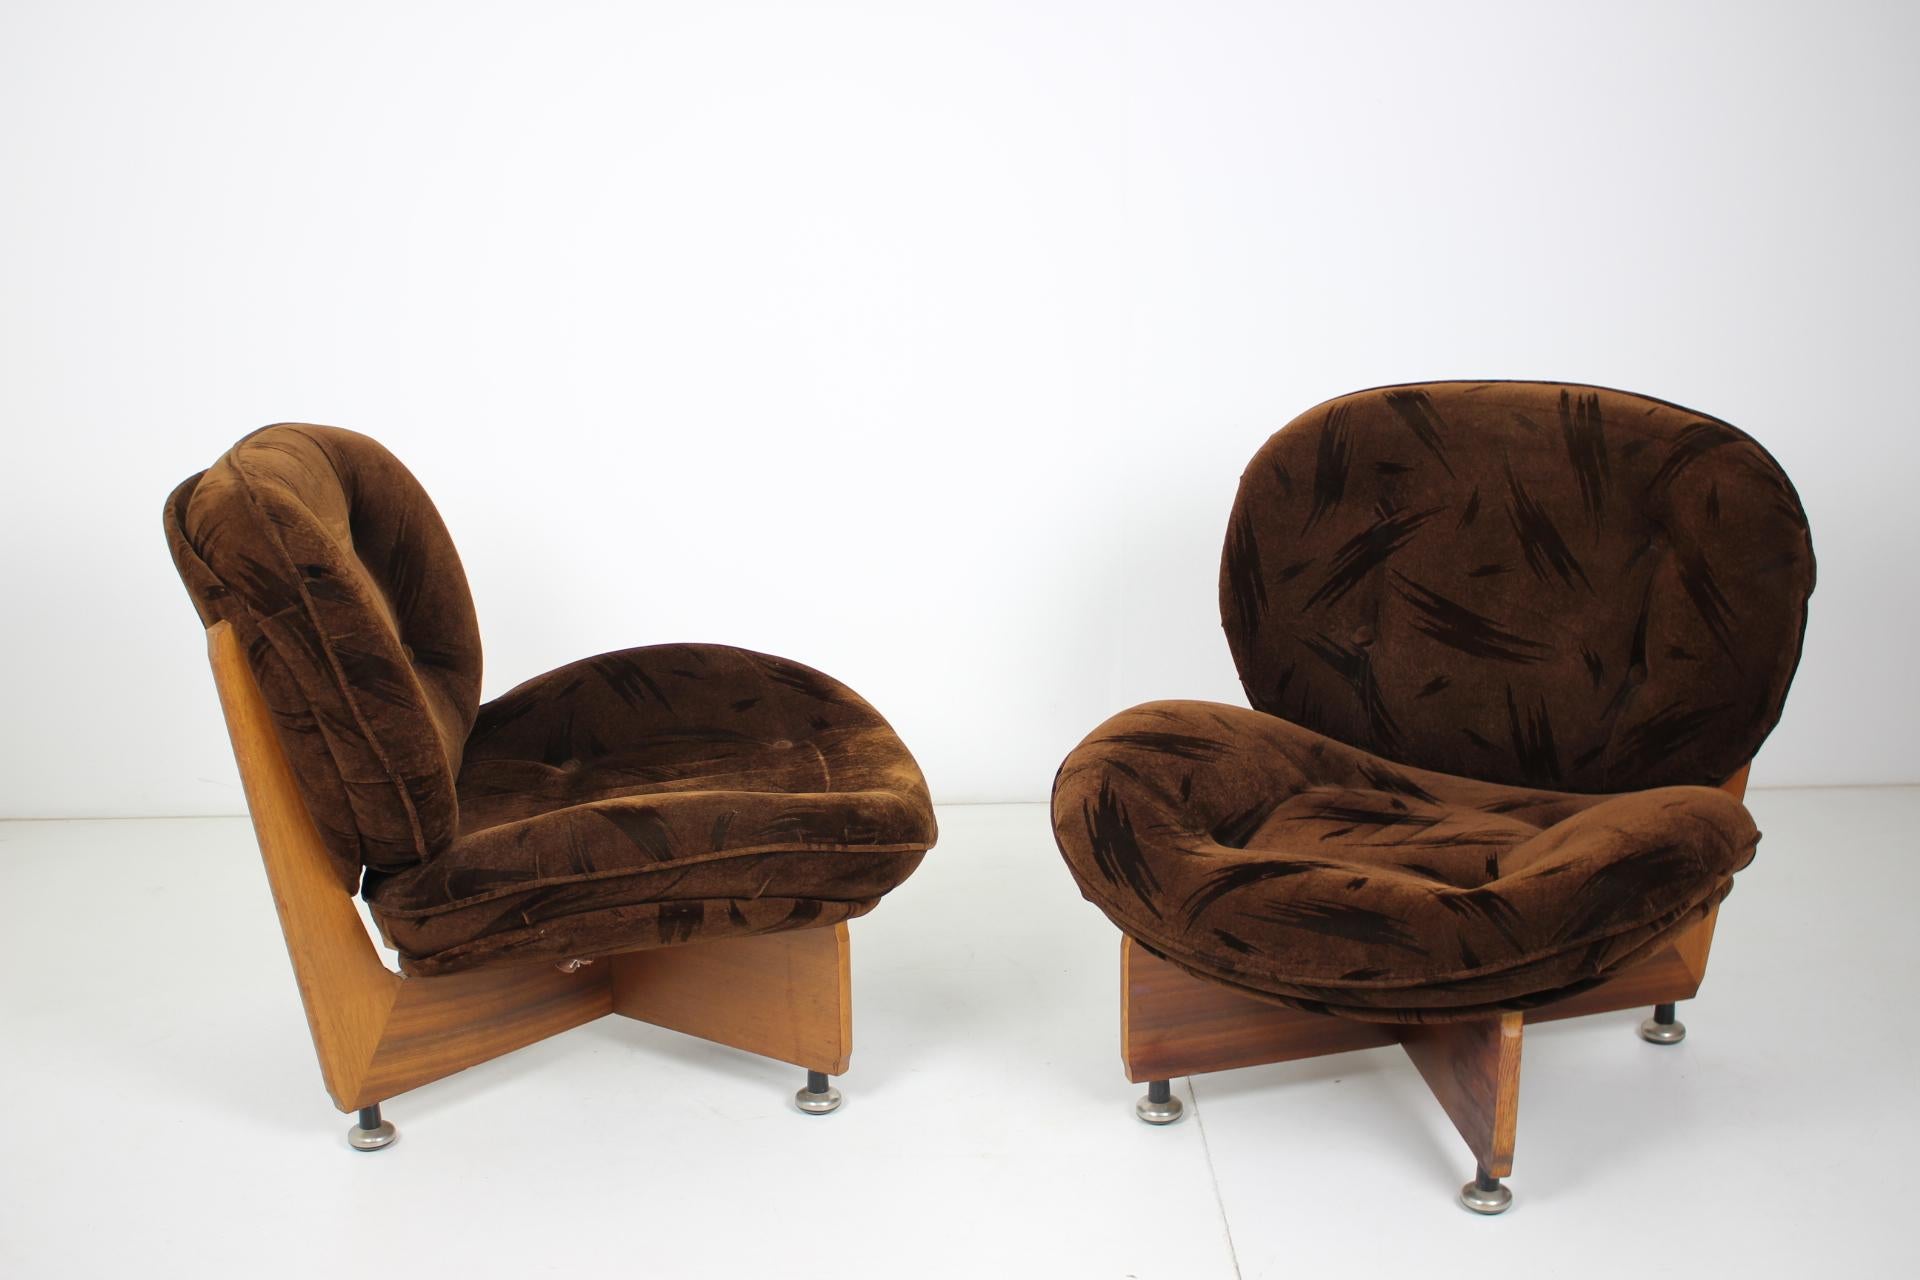 - Made in Germany
- Made of wood, fabric
- Original upholstery
- Good, original condition.